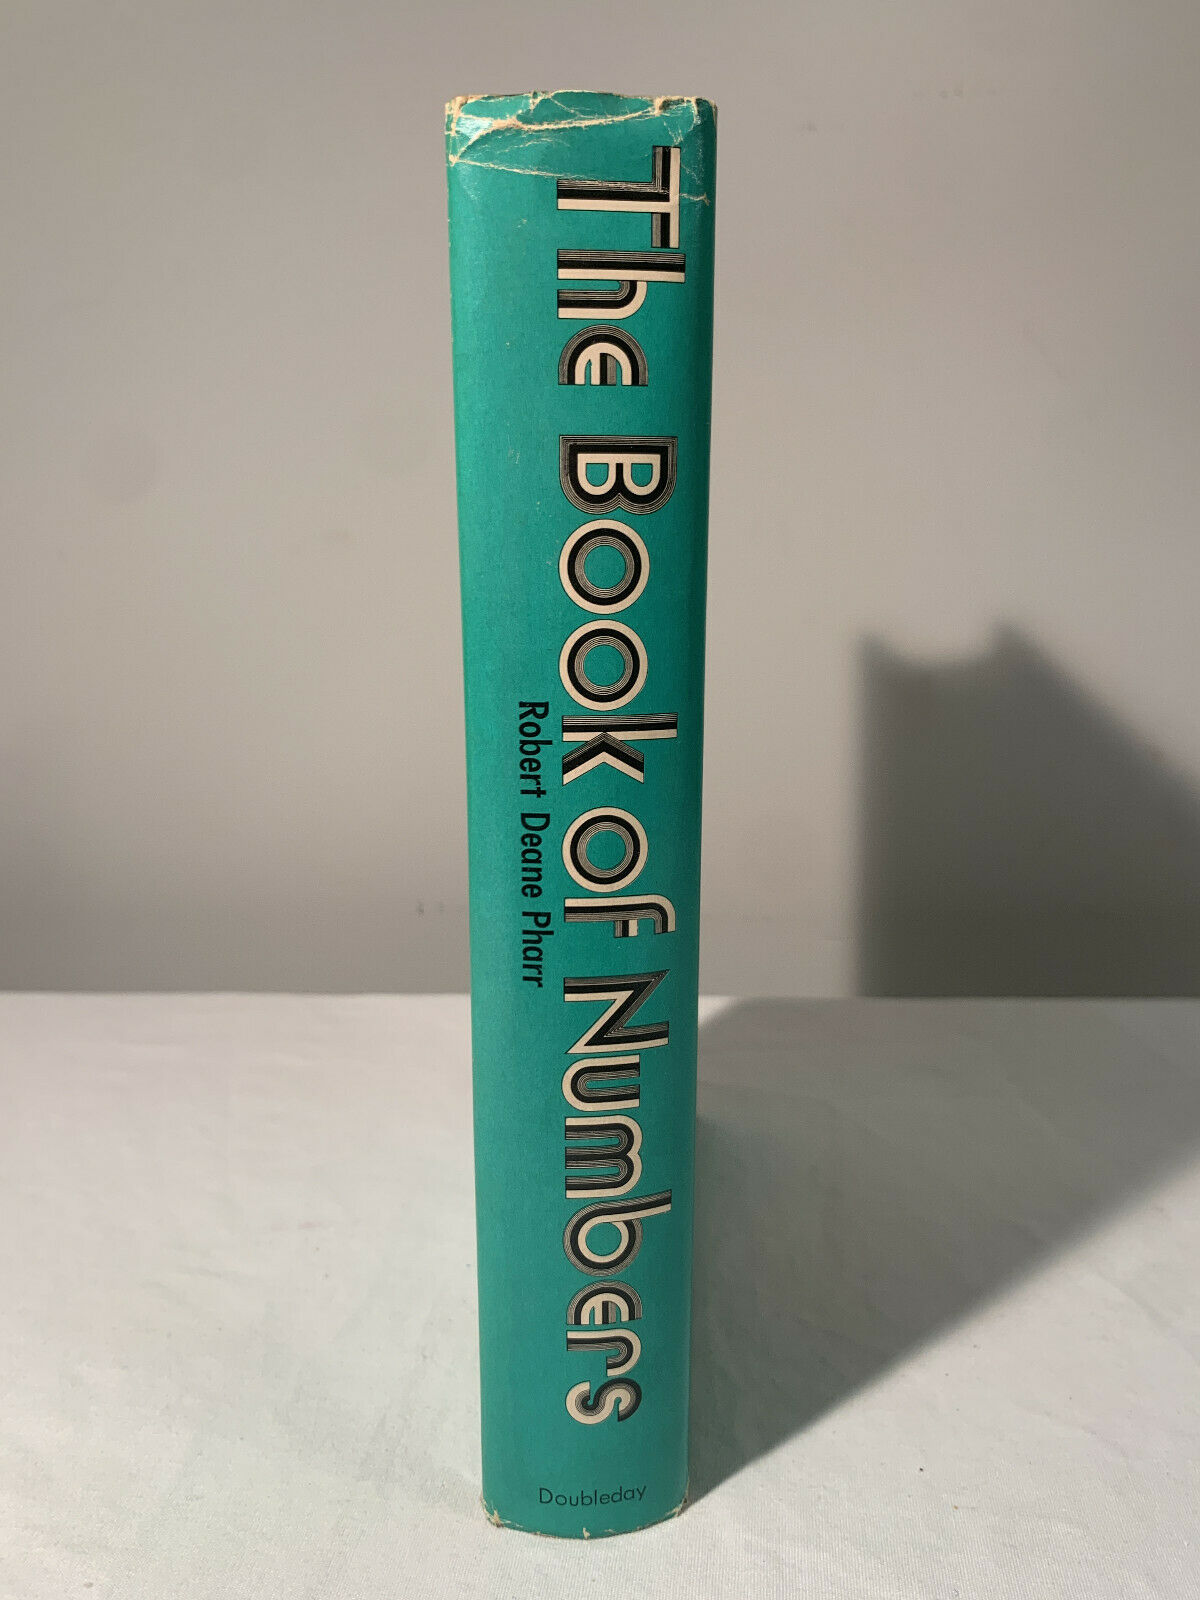 The Book of Numbers by Robert Deane Pharr [1969 · First Edition]